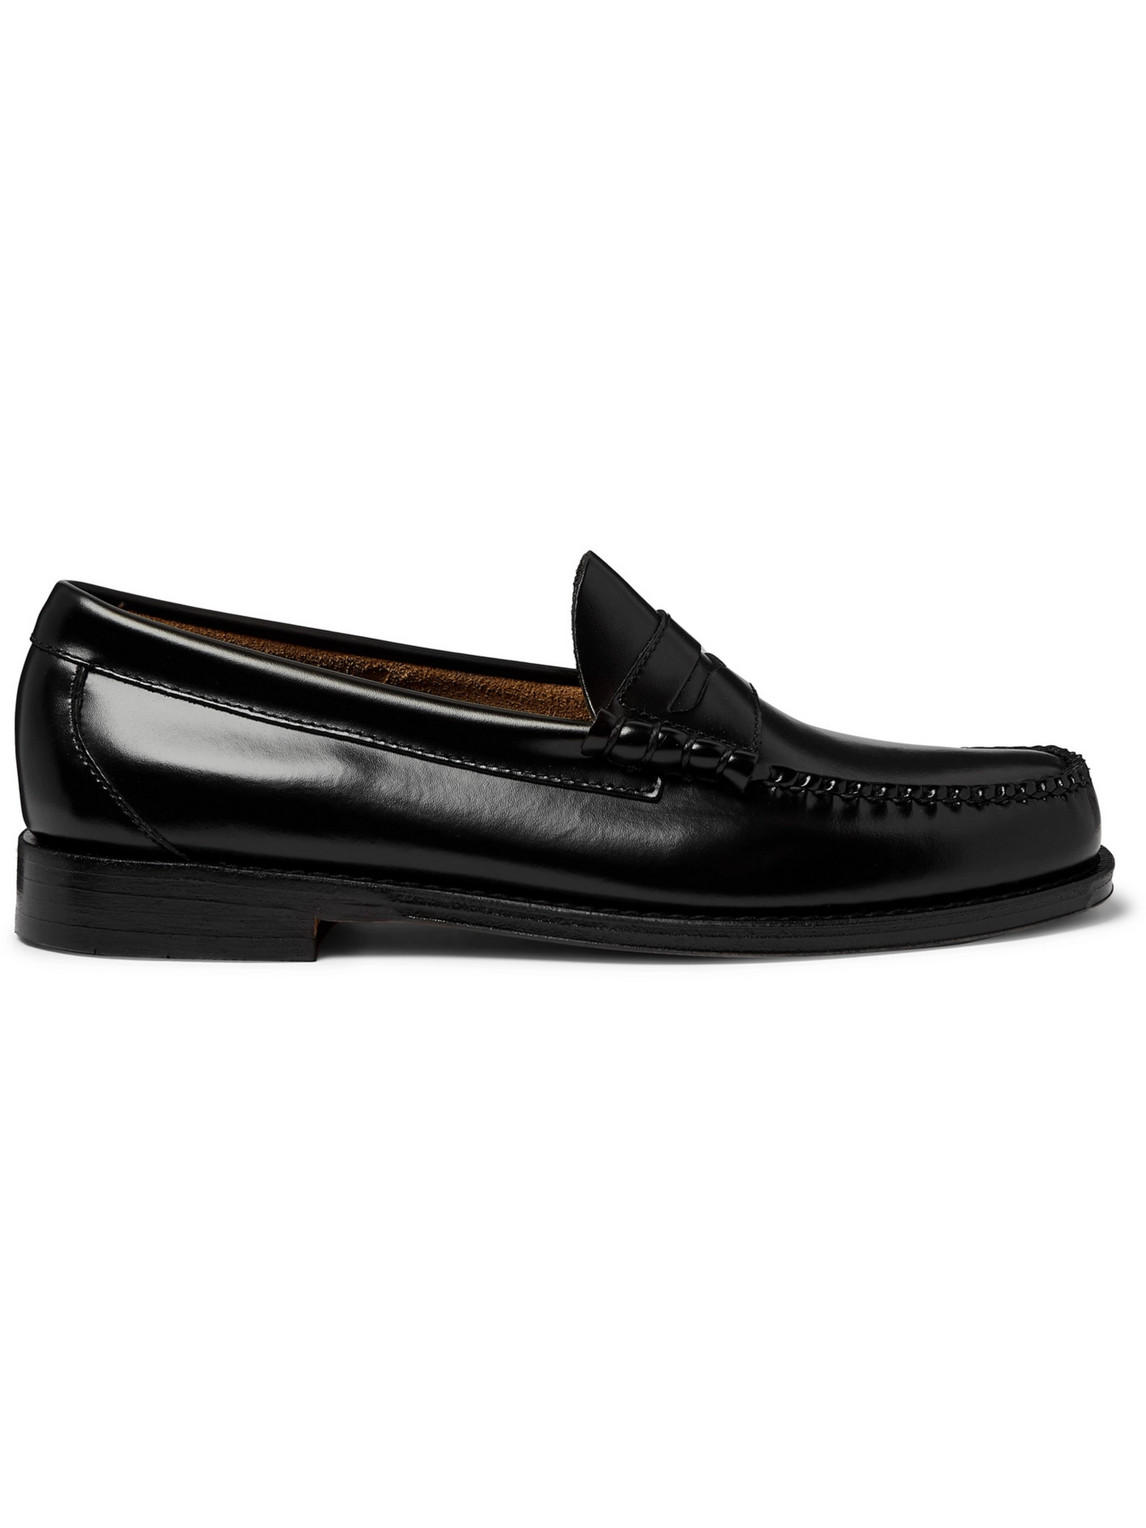 G.H. Bass & Co. - Weejuns Heritage Larson Leather Penny Loafers - Men - Black - UK 6 von G.H. Bass & Co.